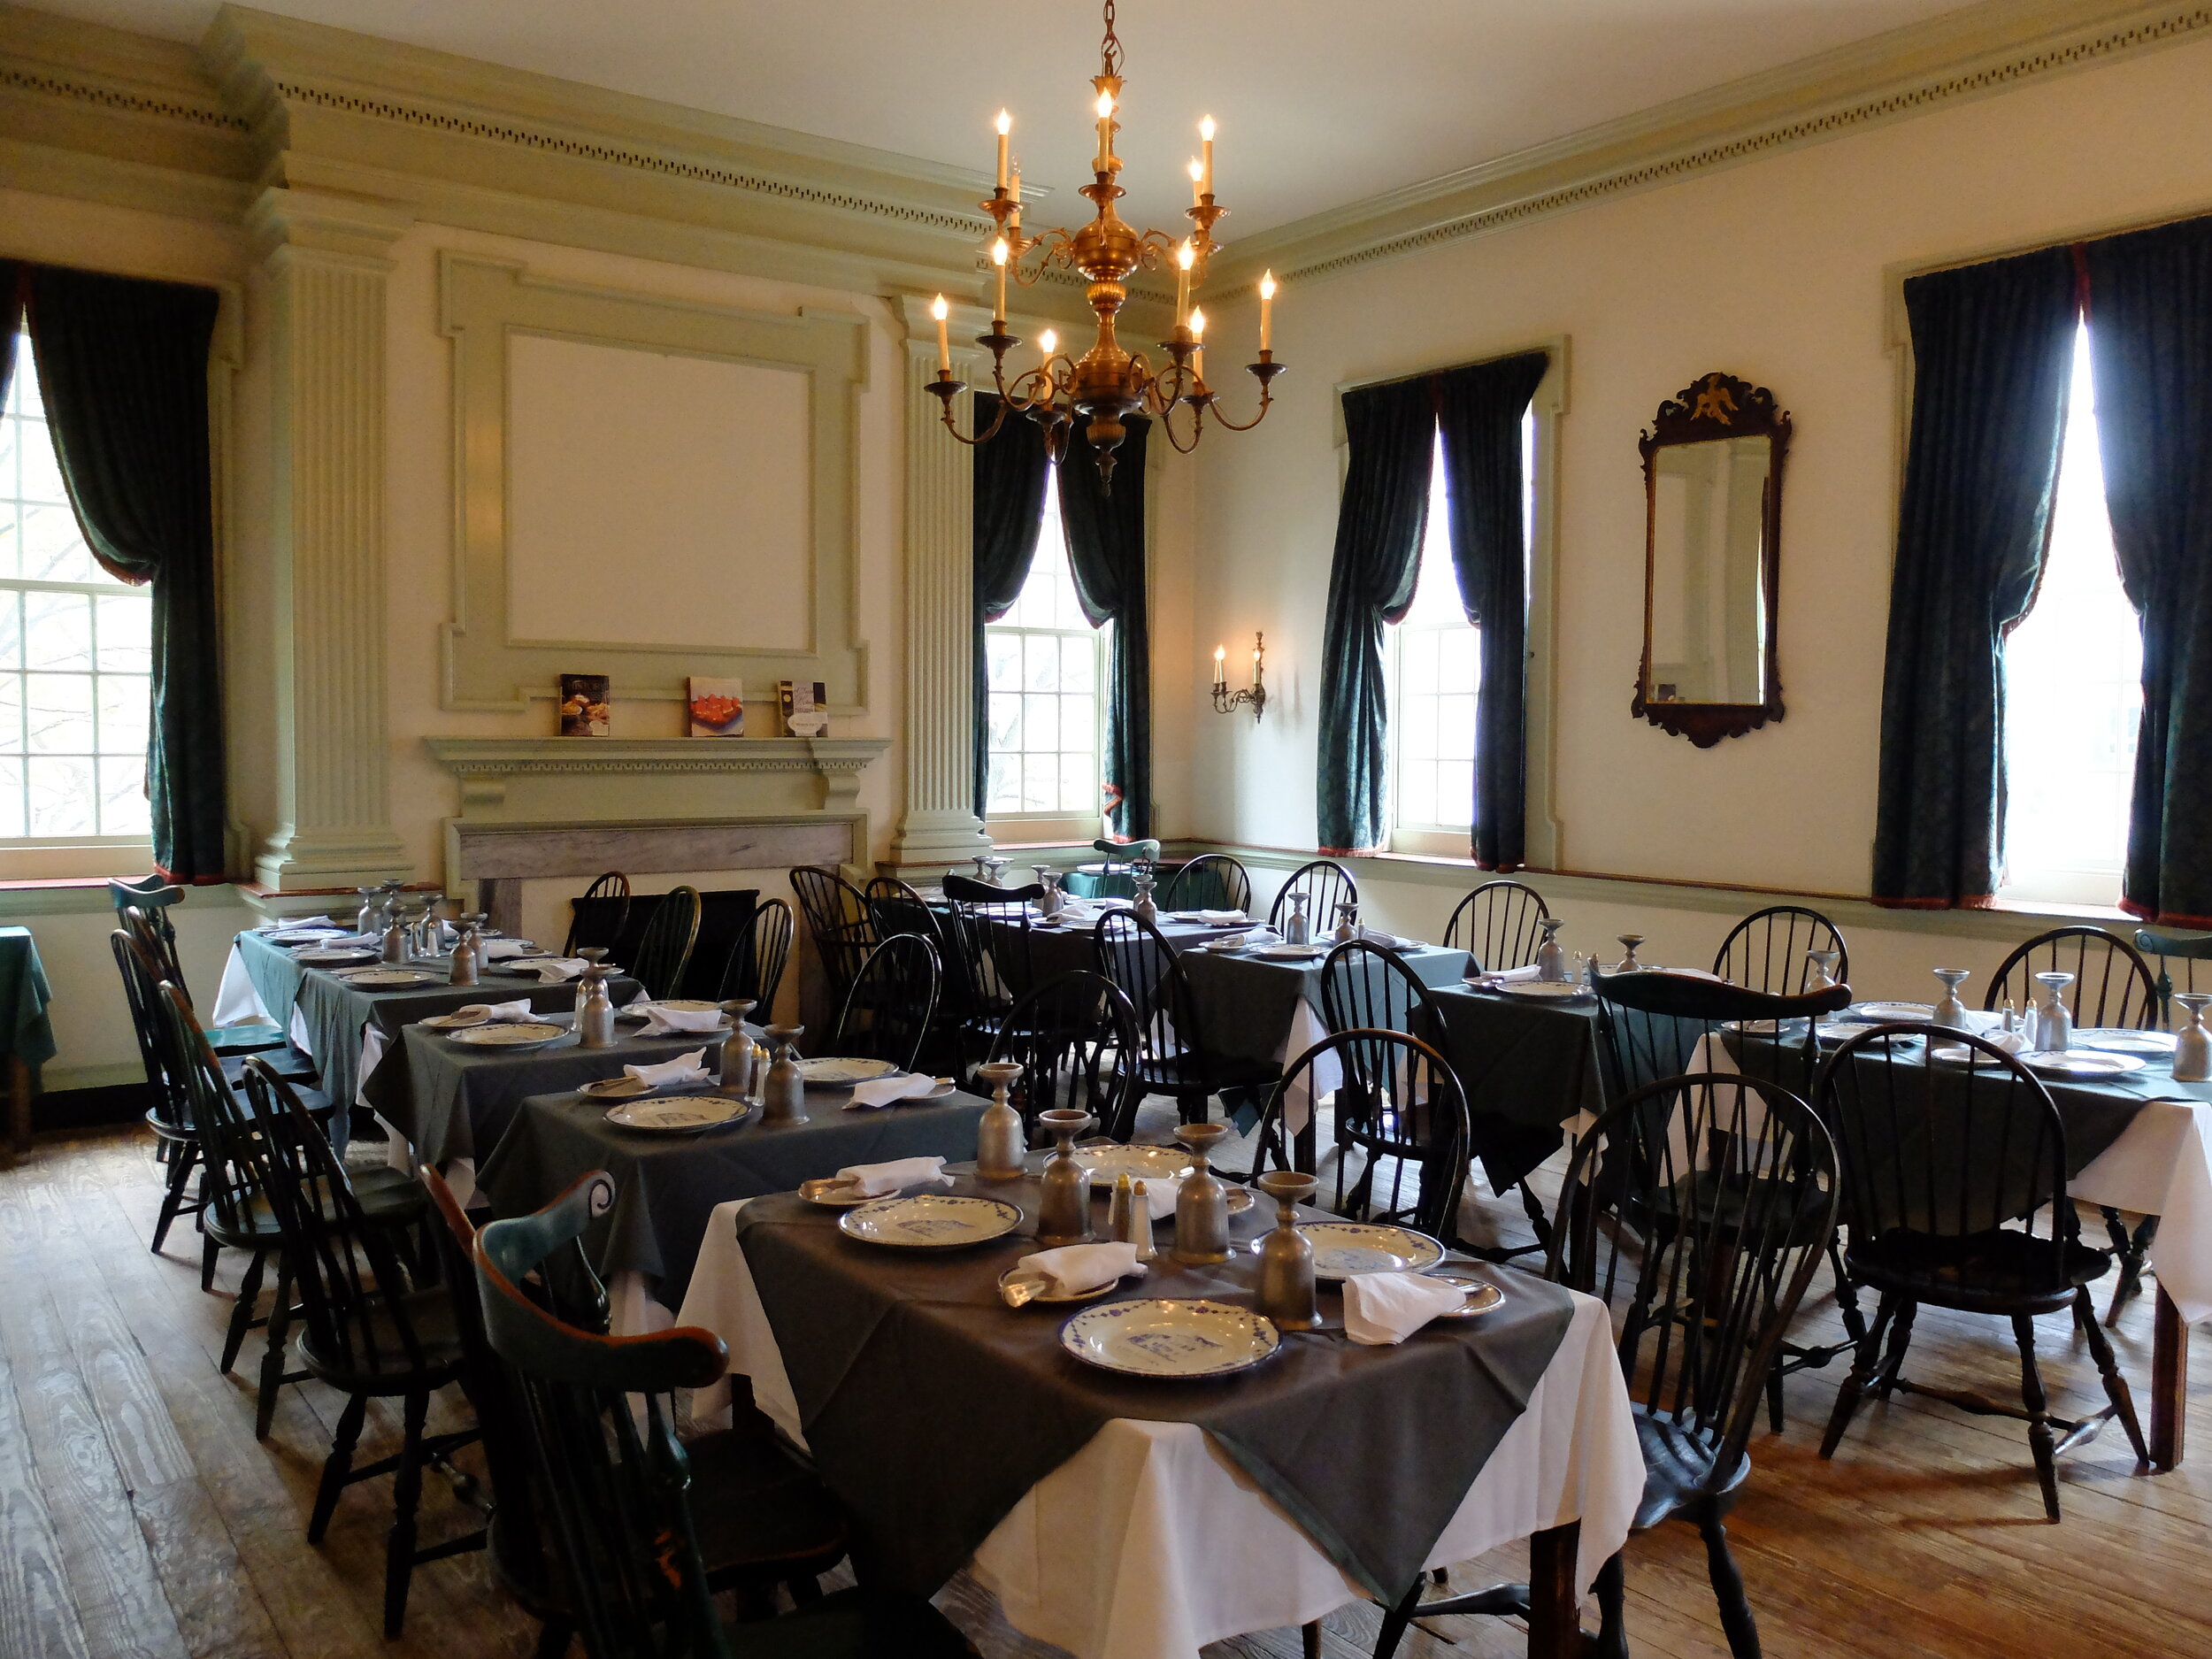 Many important historic events took place at The City Tavern, including Washington's first meeting Lafayette in 1777.